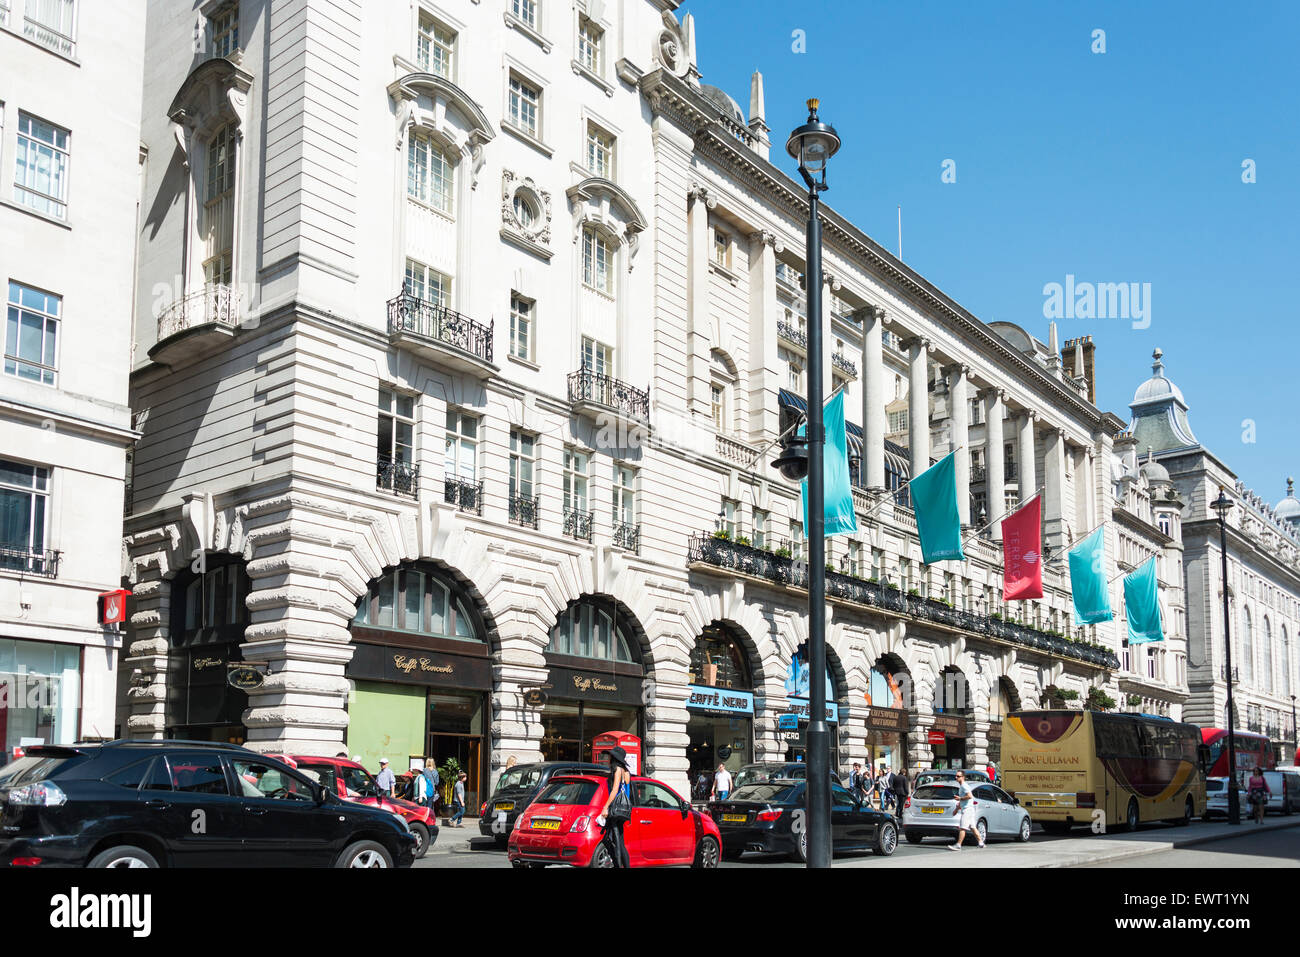 Le Meridien Piccadilly Hotel, Piccadilly, City of Westminster, Londra, Inghilterra, Regno Unito Foto Stock